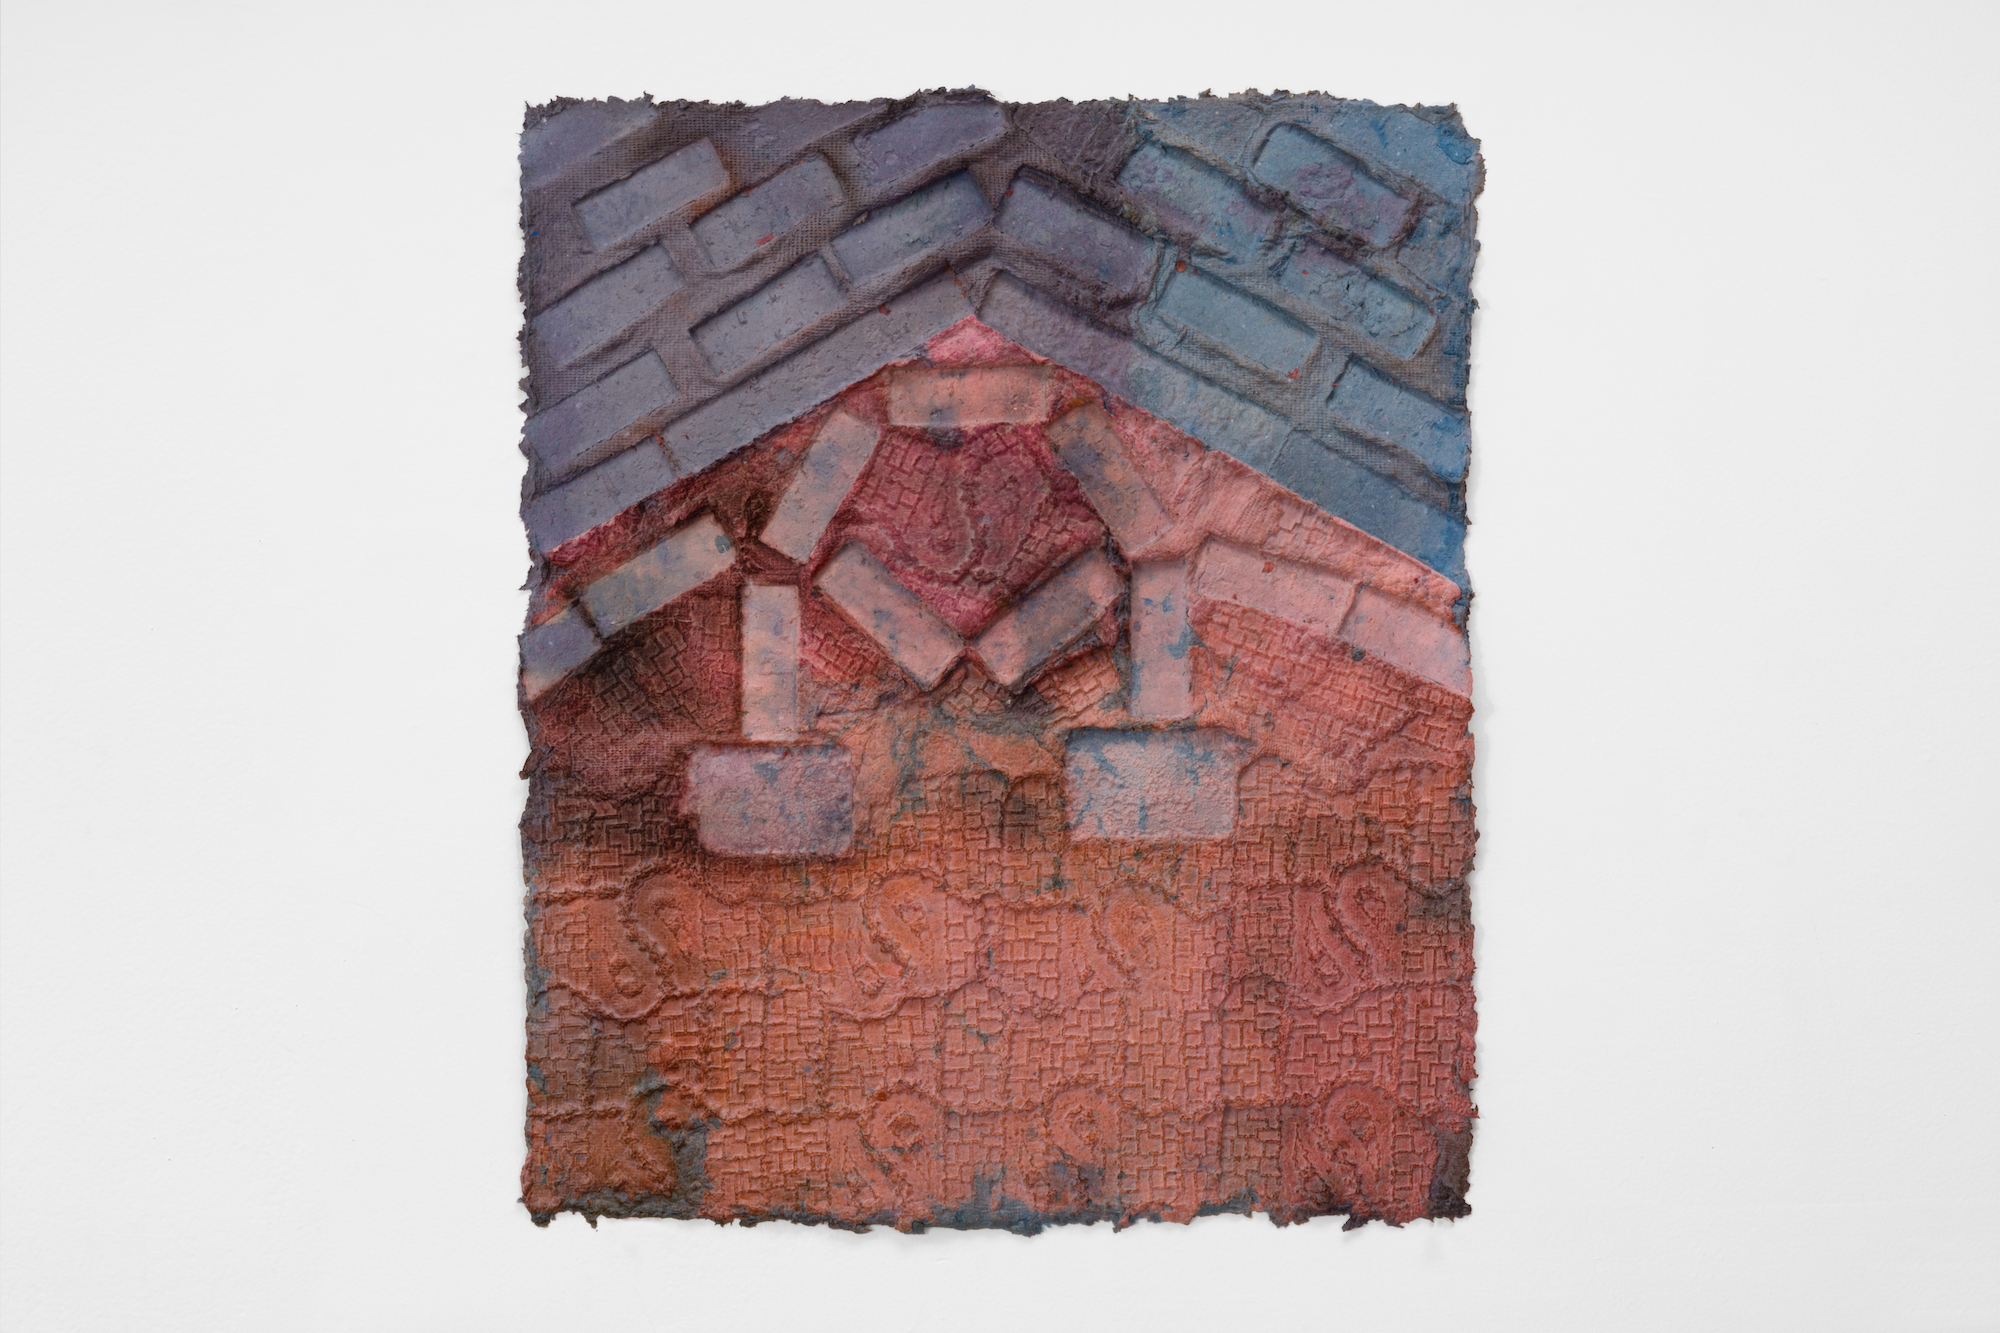 Element, 2021, Dyed handmade paper, 26.5 x 22.5 in